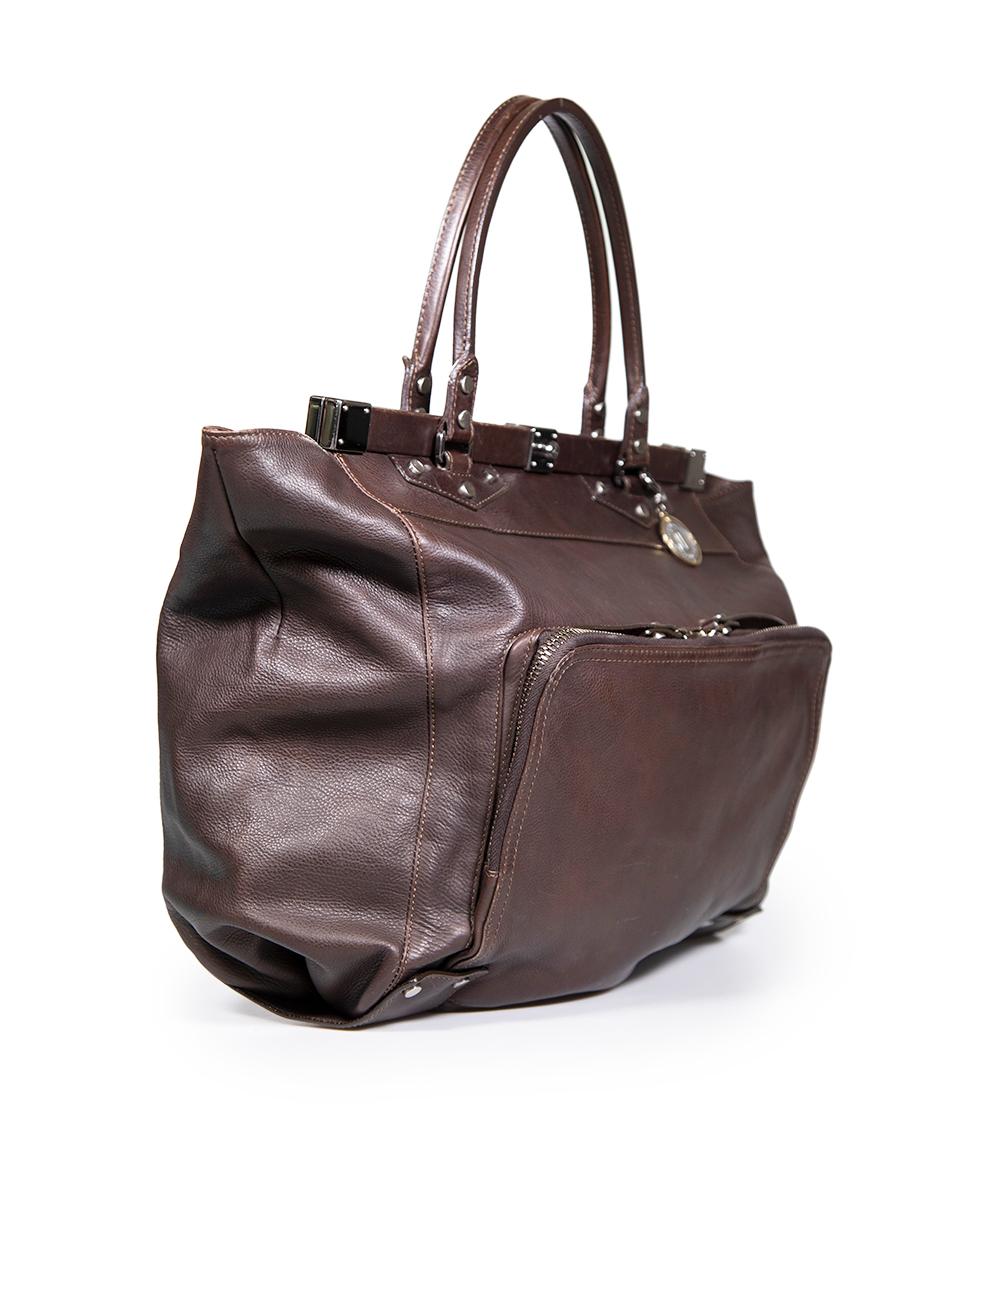 CONDITION is Good. Minor wear to bag is evident. Light wear to the front, back, handles, base and lining with scratches and abrasions to the leather. The rear right handle base has also split on this used Lanvin designer resale item.
 
 Details
